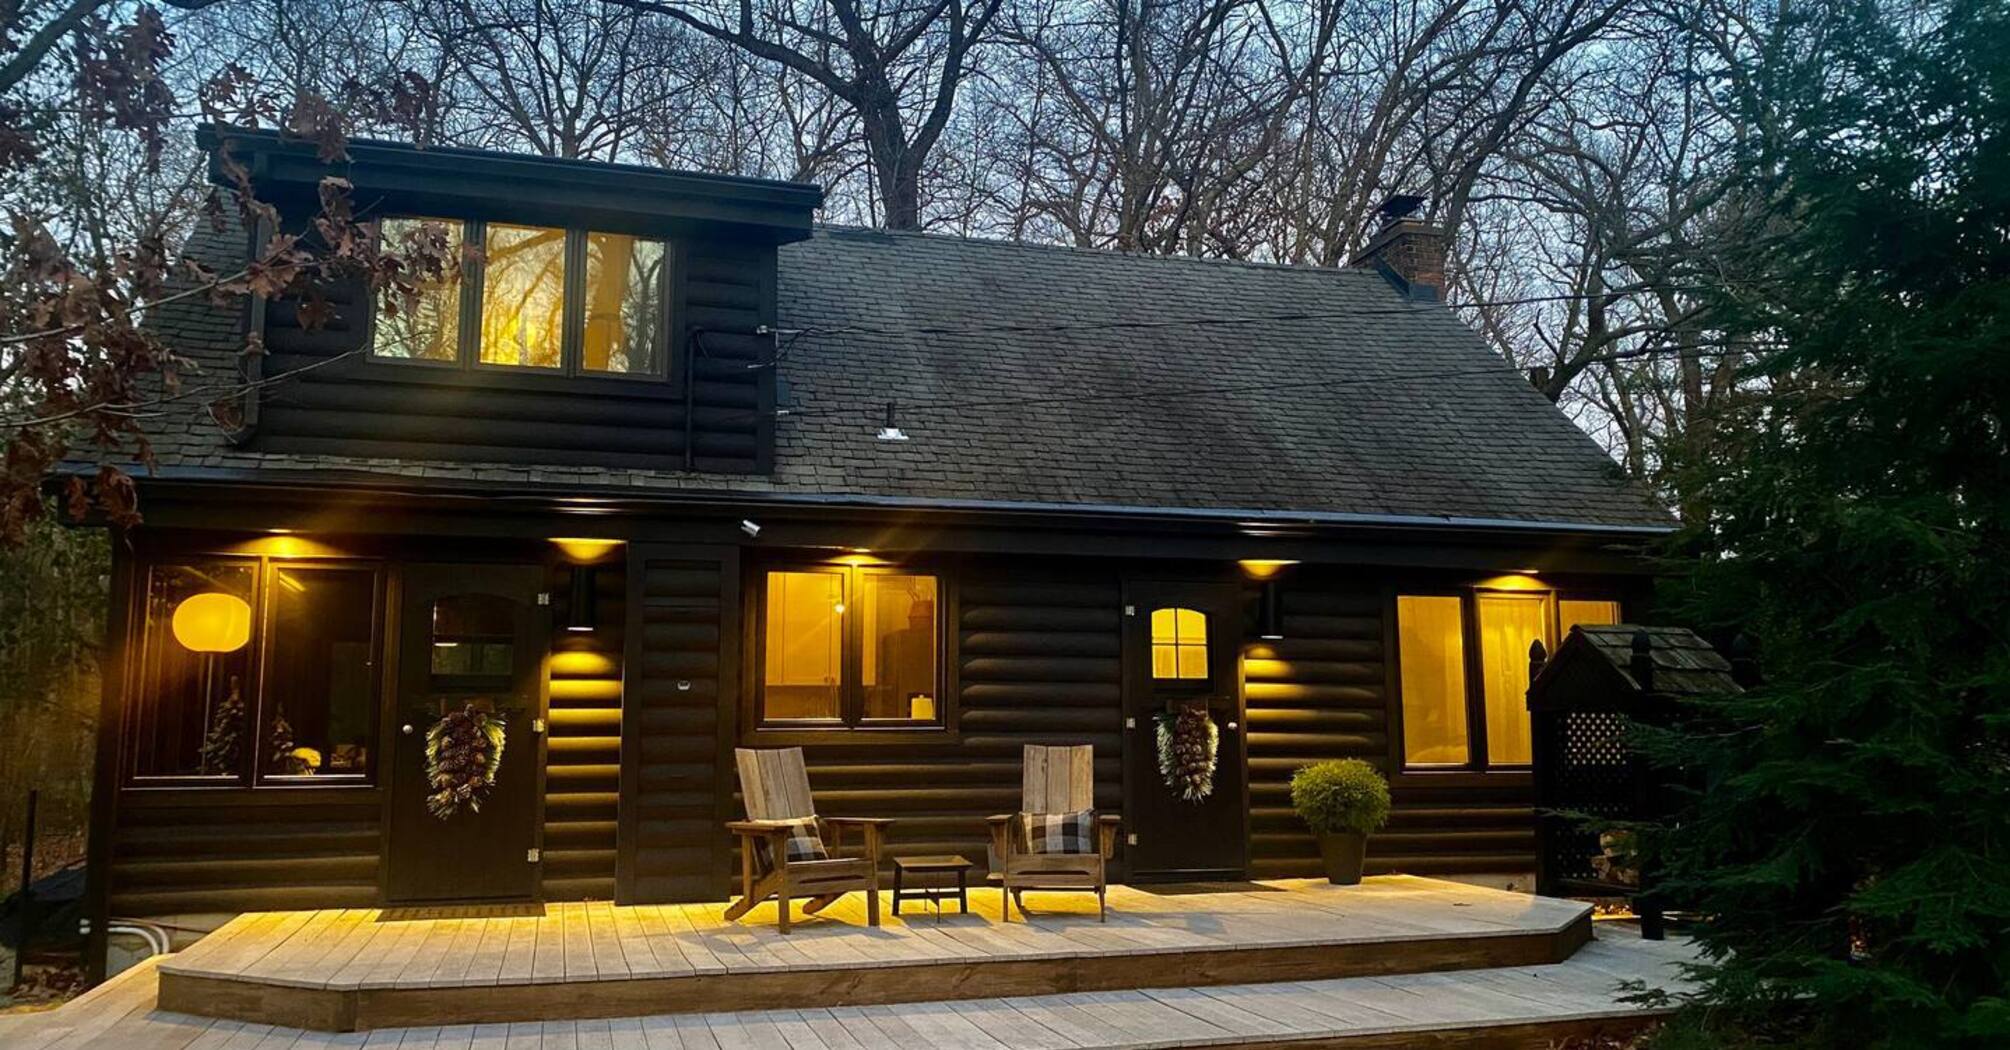 Top 12 Airbnb homes near Chicago, from secluded escapes surrounded by dunes and forests to hygge-style cottages or a private spa